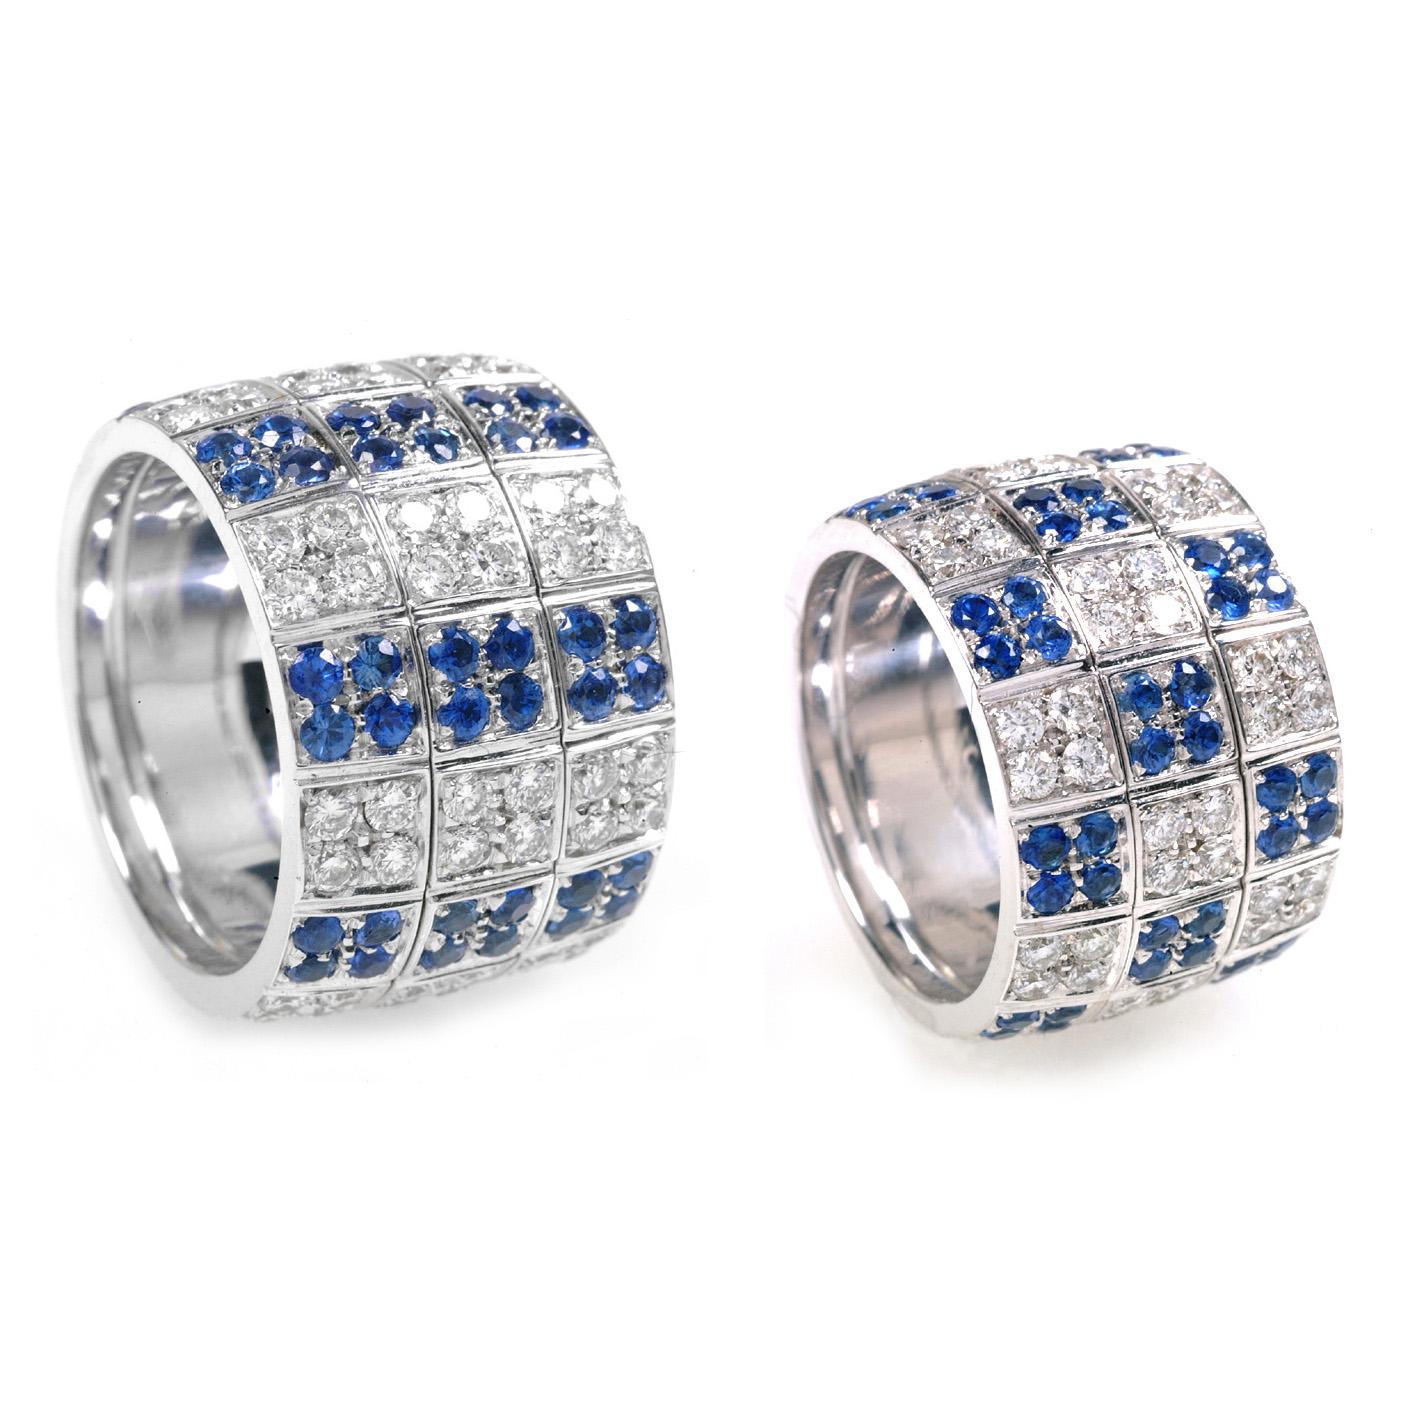 Set with three rows, each row divided in squares alternating round brilliant diamonds and round brilliant sapphires. The central row moves from right to left giving a new layout to the ring design.

Mounted in 18k white gold

- diamonds: 1.88 cts